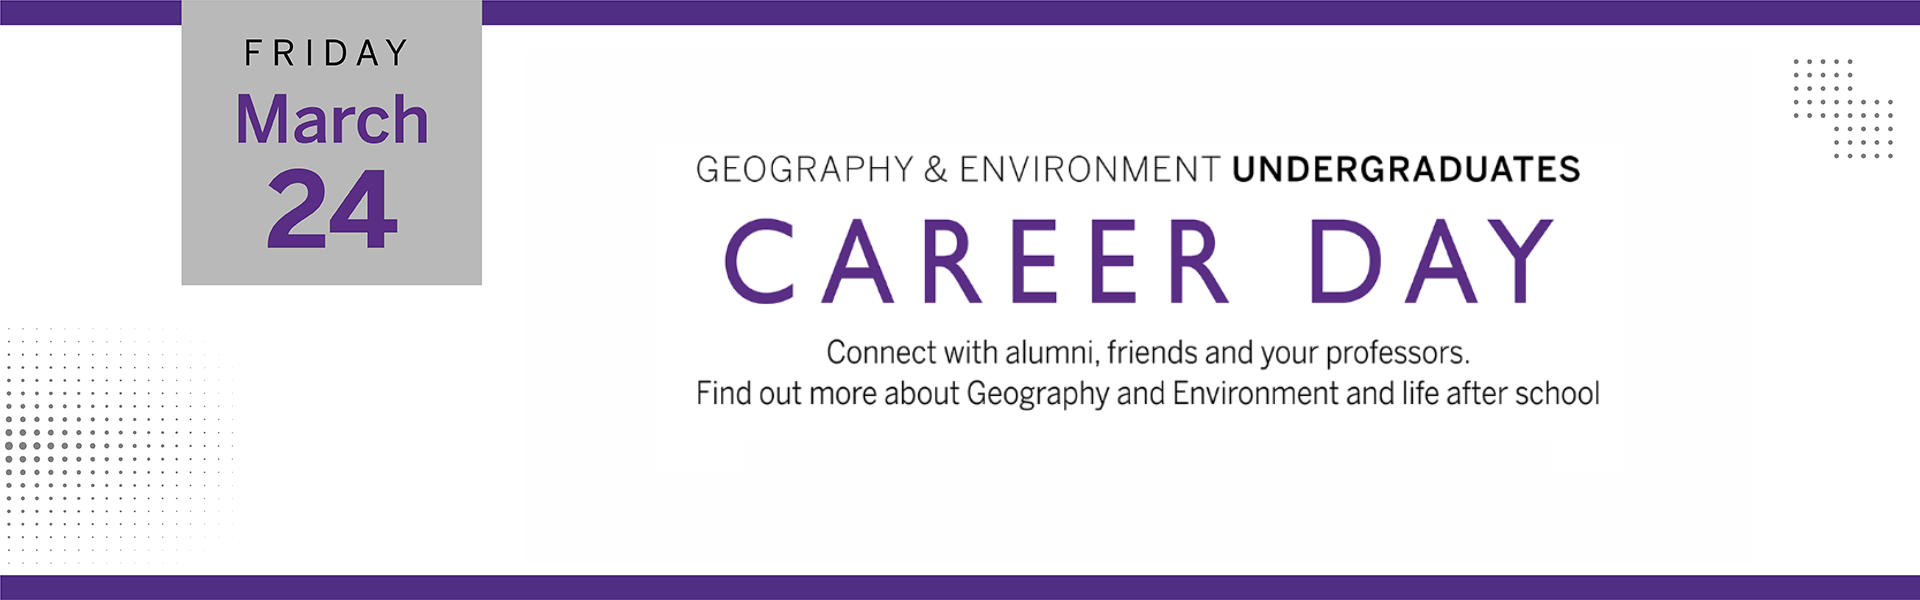 Geography and Environment Undergraduate Career Day, March 24